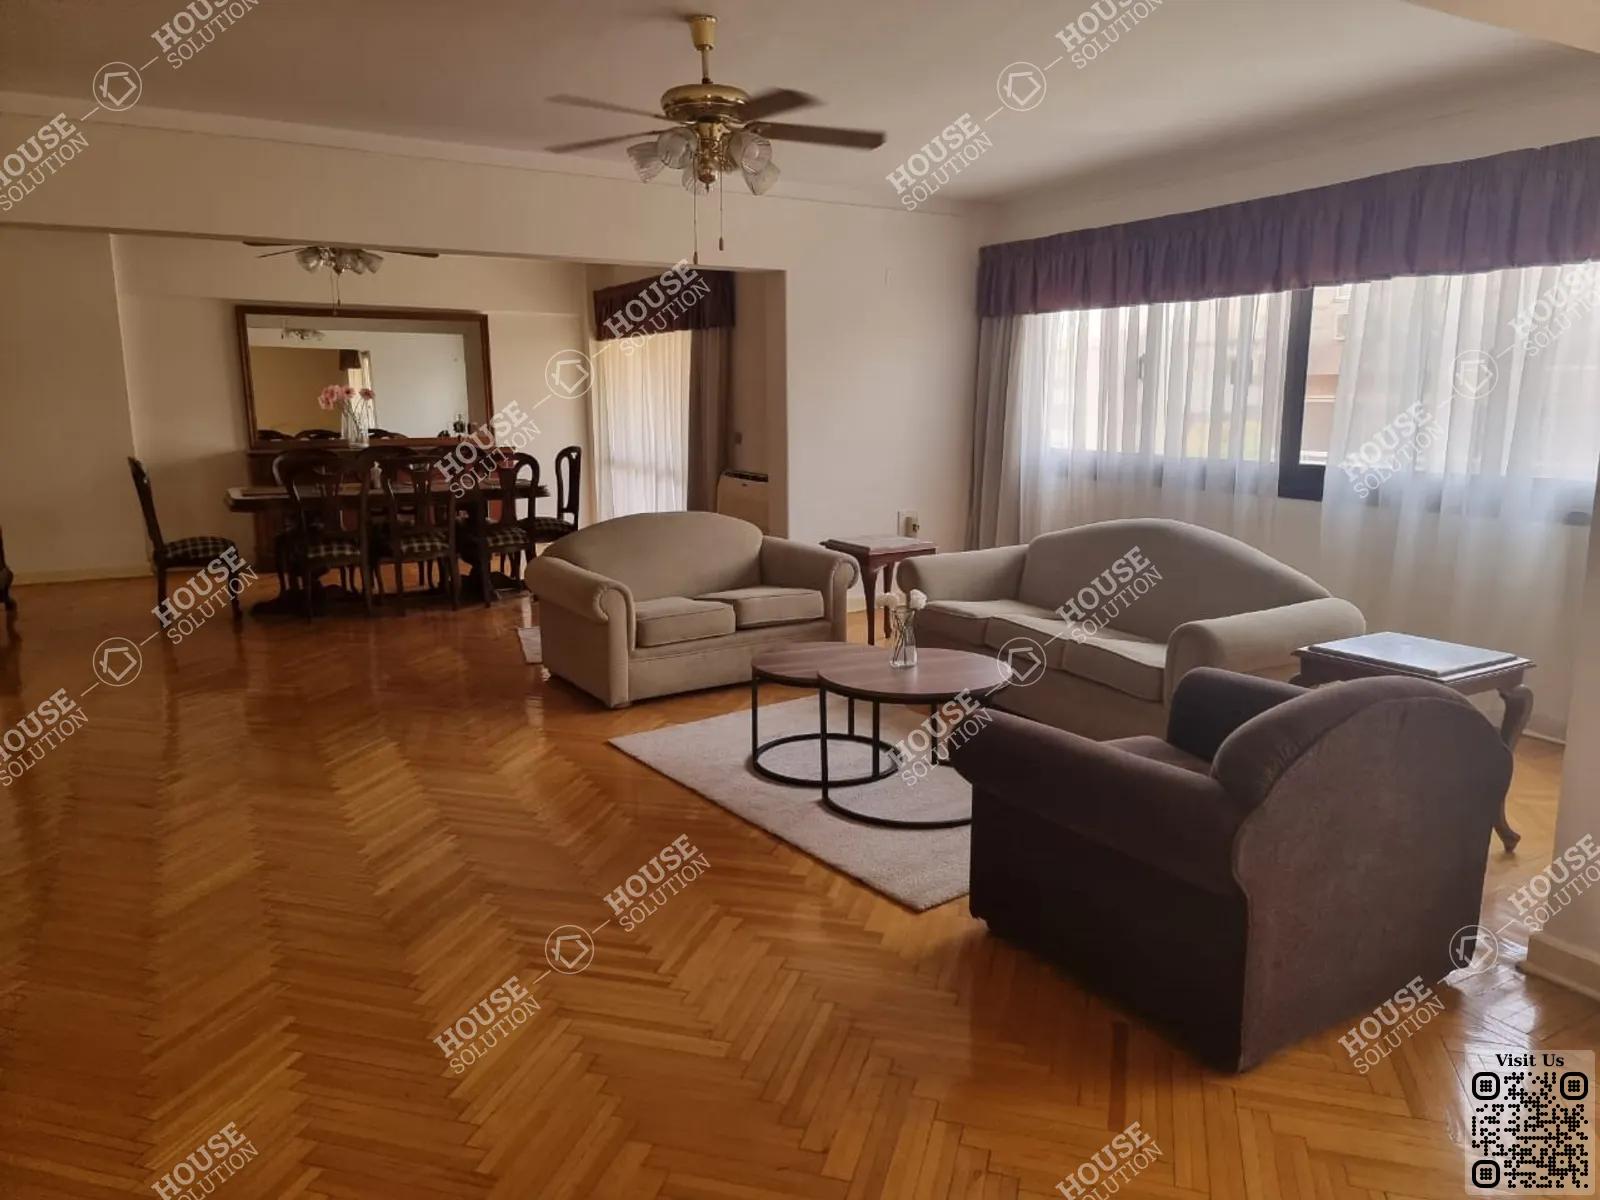 RECEPTION  @ Apartments For Rent In Maadi Maadi Degla Area: 220 m² consists of 3 Bedrooms 3 Bathrooms Modern furnished 5 stars #5672-0